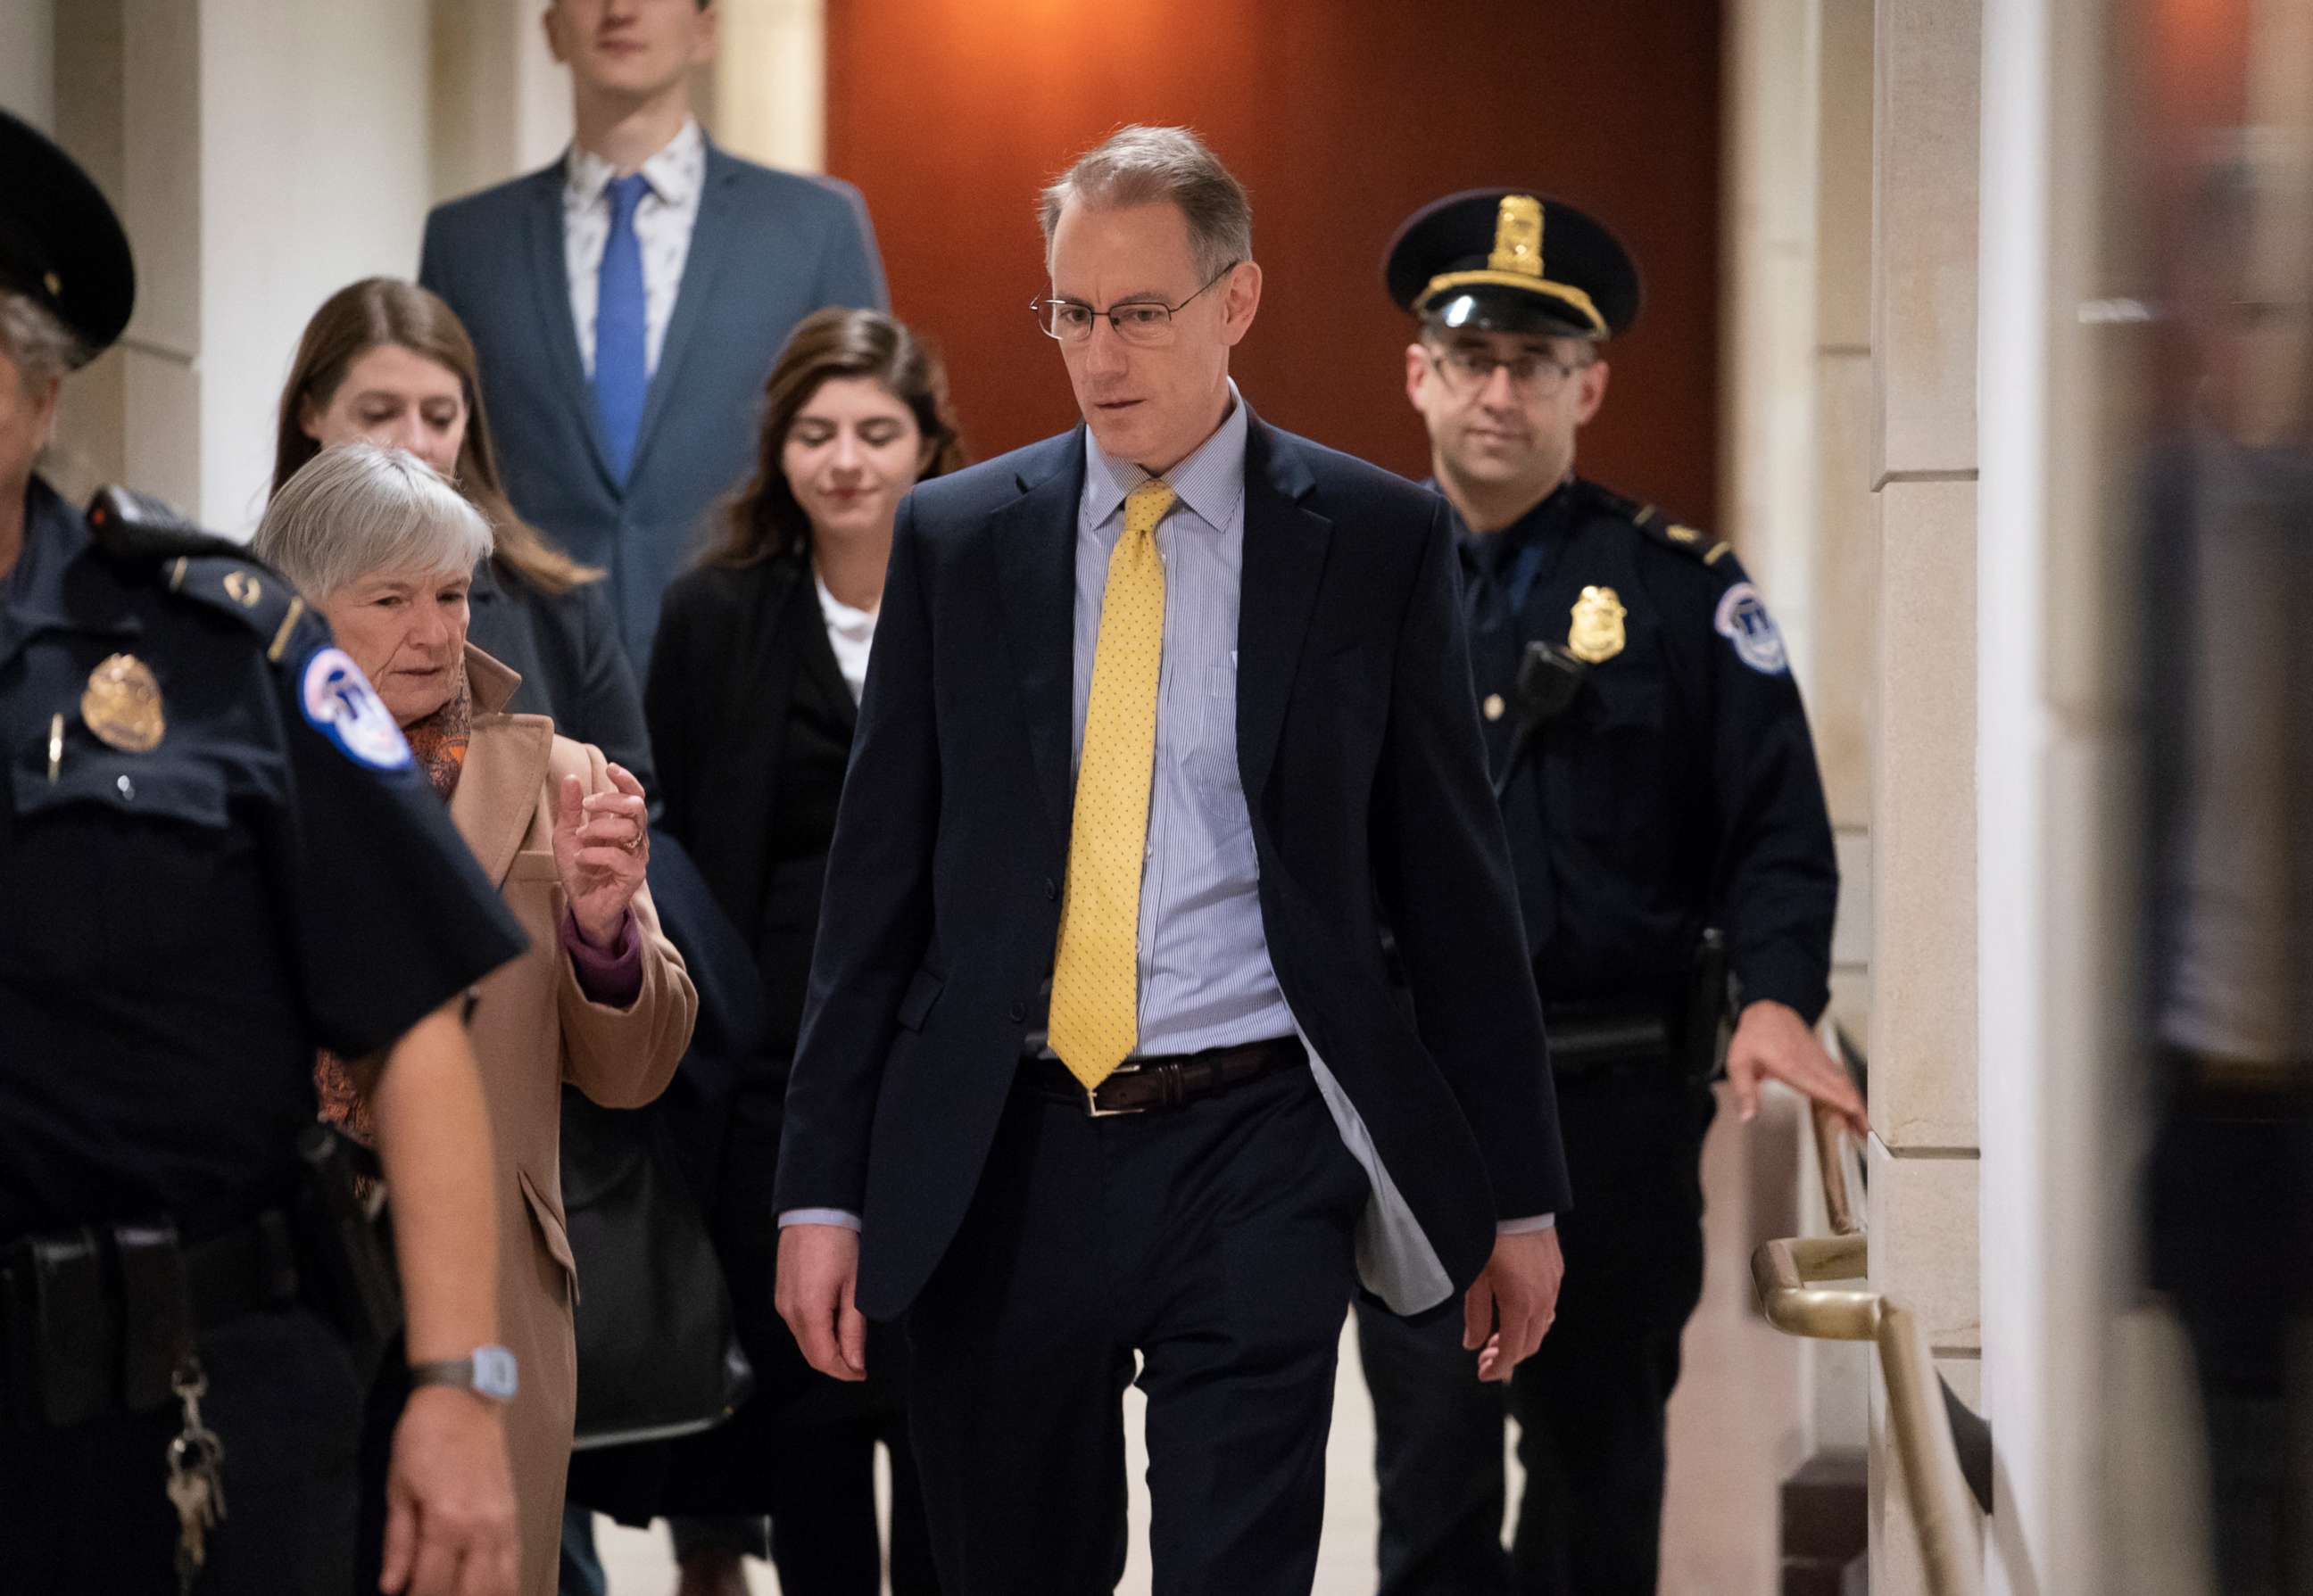 PHOTO: Mark Sandy, a career employee in the White House Office of Management and Budget, arrives at the Capitol to testify in the House Democrats' impeachment inquiry.